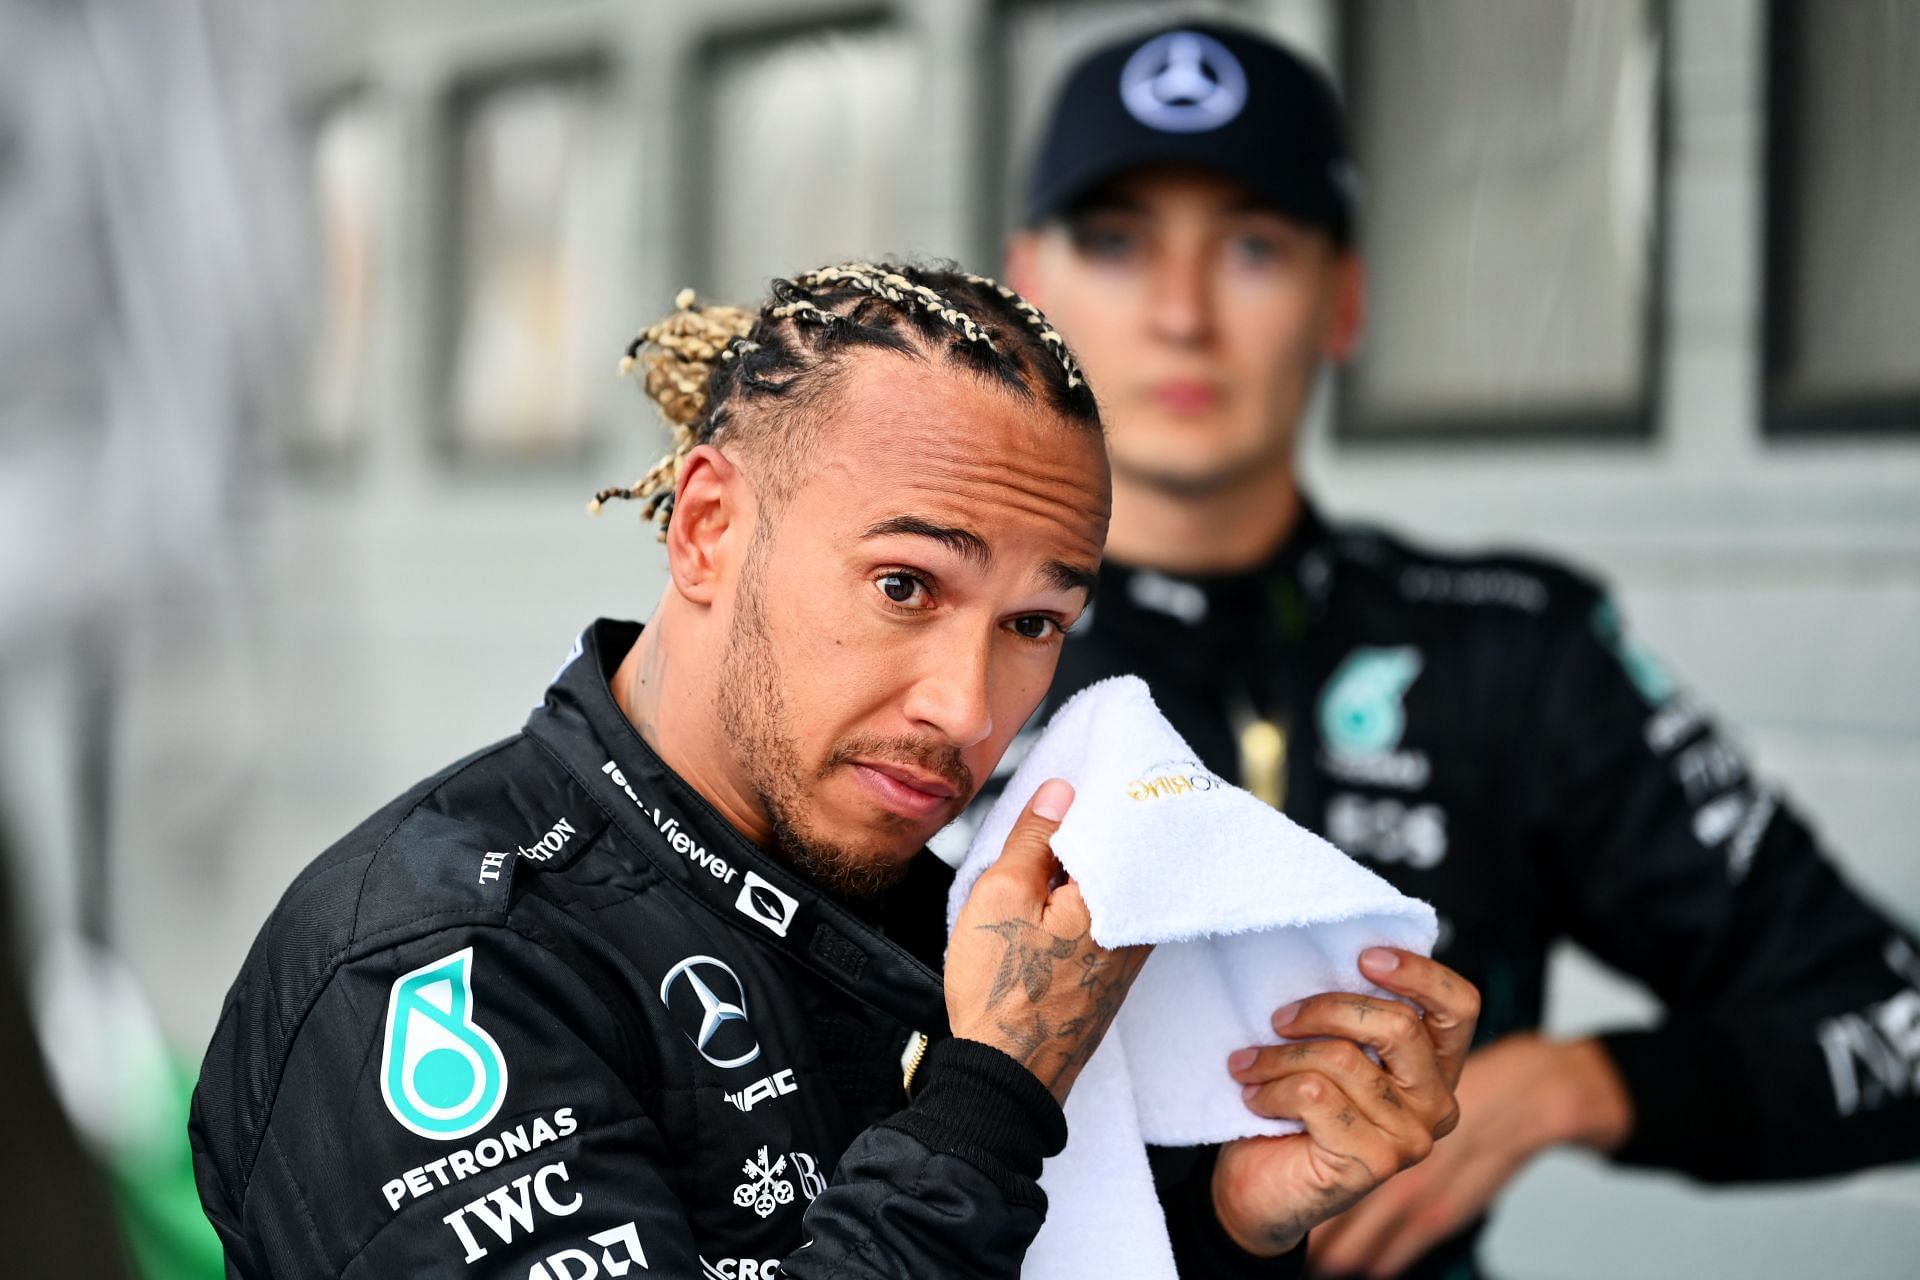 Lewis Hamilton and George Russell look on in parc ferme during the F1 Grand Prix of Hungary at Hungaroring on July 31, 2022, in Budapest, Hungary (Photo by Dan Mullan/Getty Images)